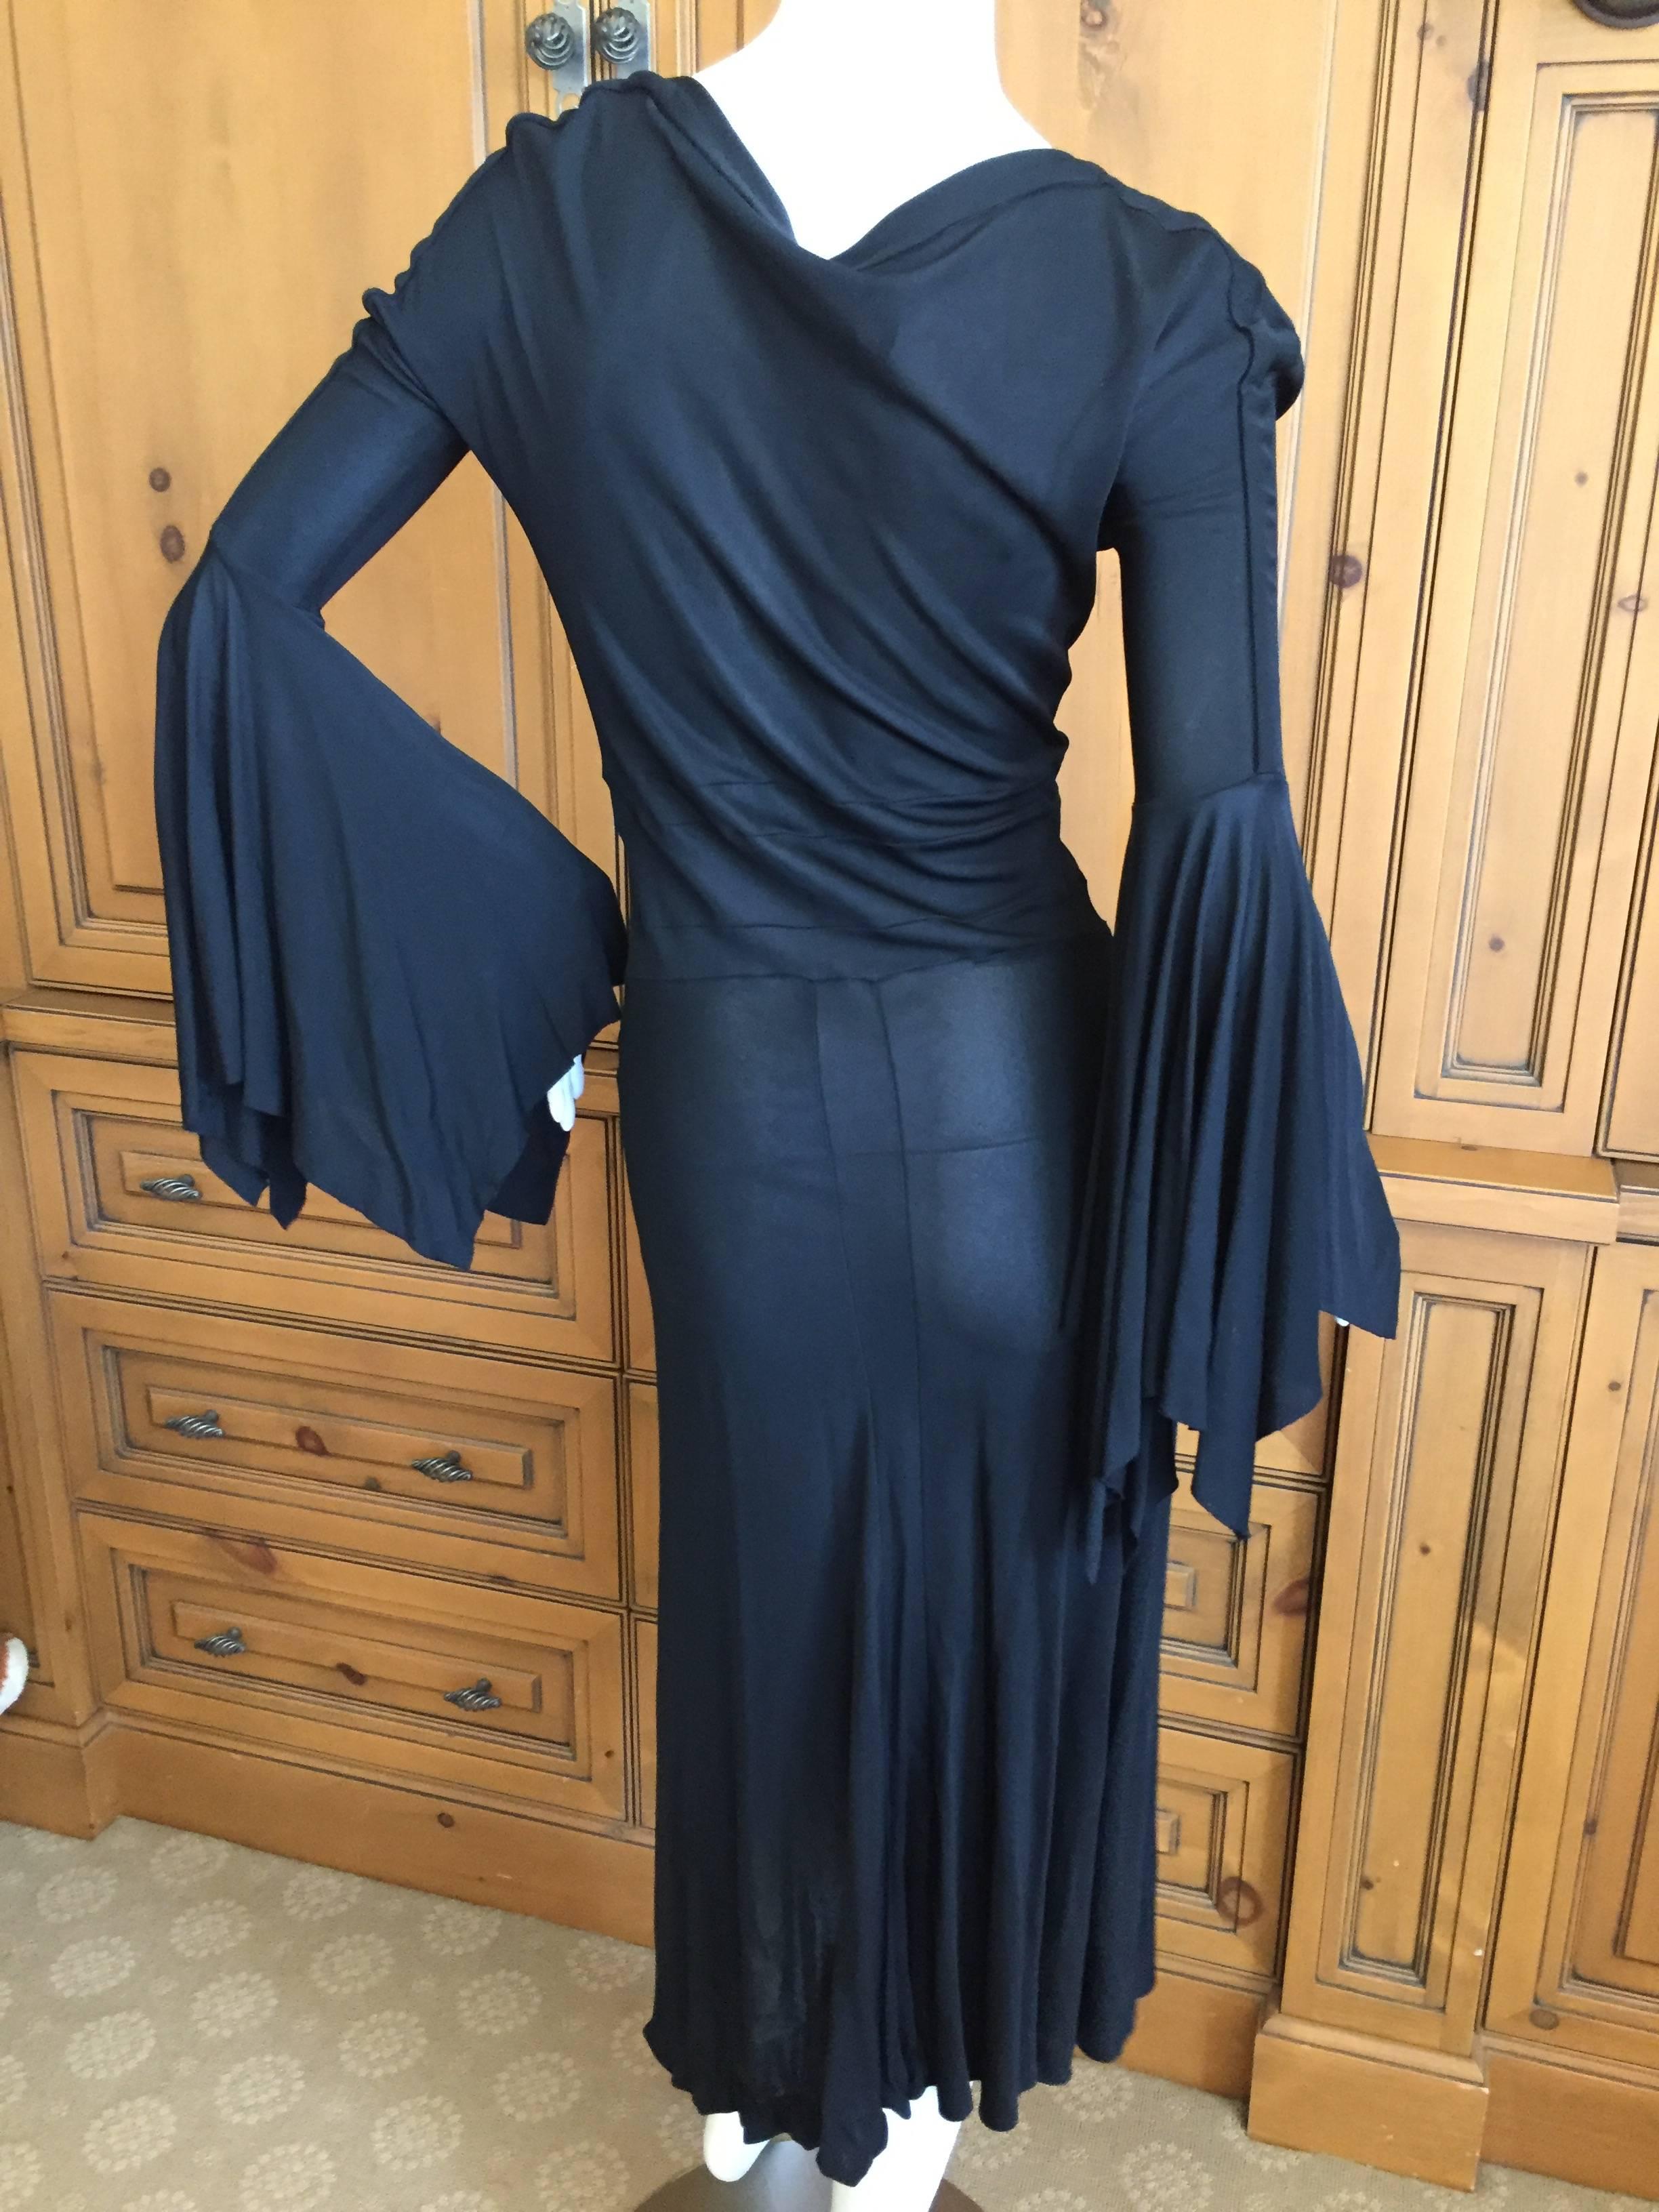 Wonderful low cut dress with bell sleeves from Tom Ford for Yves Saint Laurent.
Size Small
Bust 34”, Waist 24”, Hip 34”, Length 47”